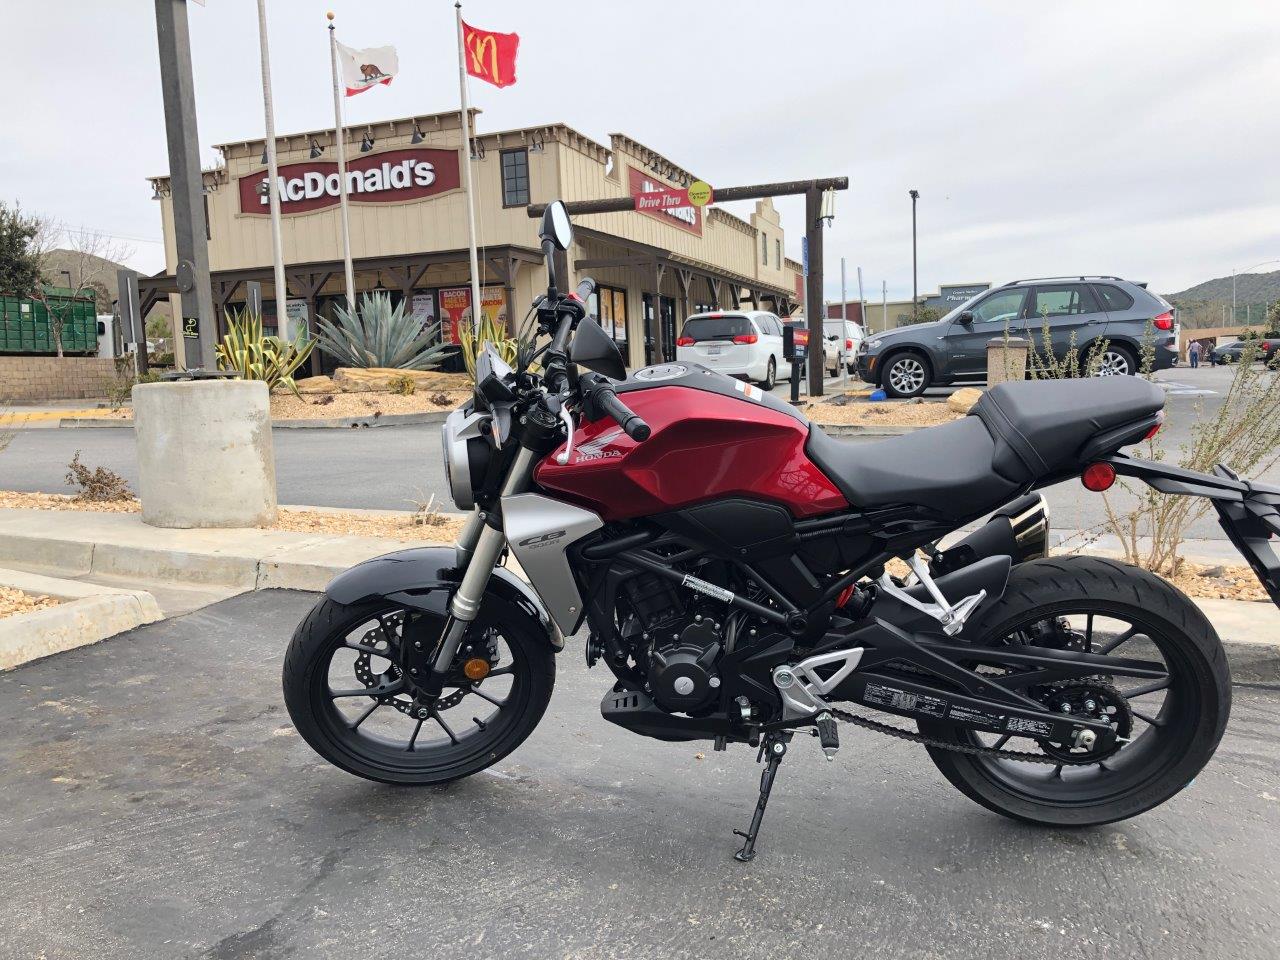 2019 Honda CB300R at the Golden Arches in Acton, California.